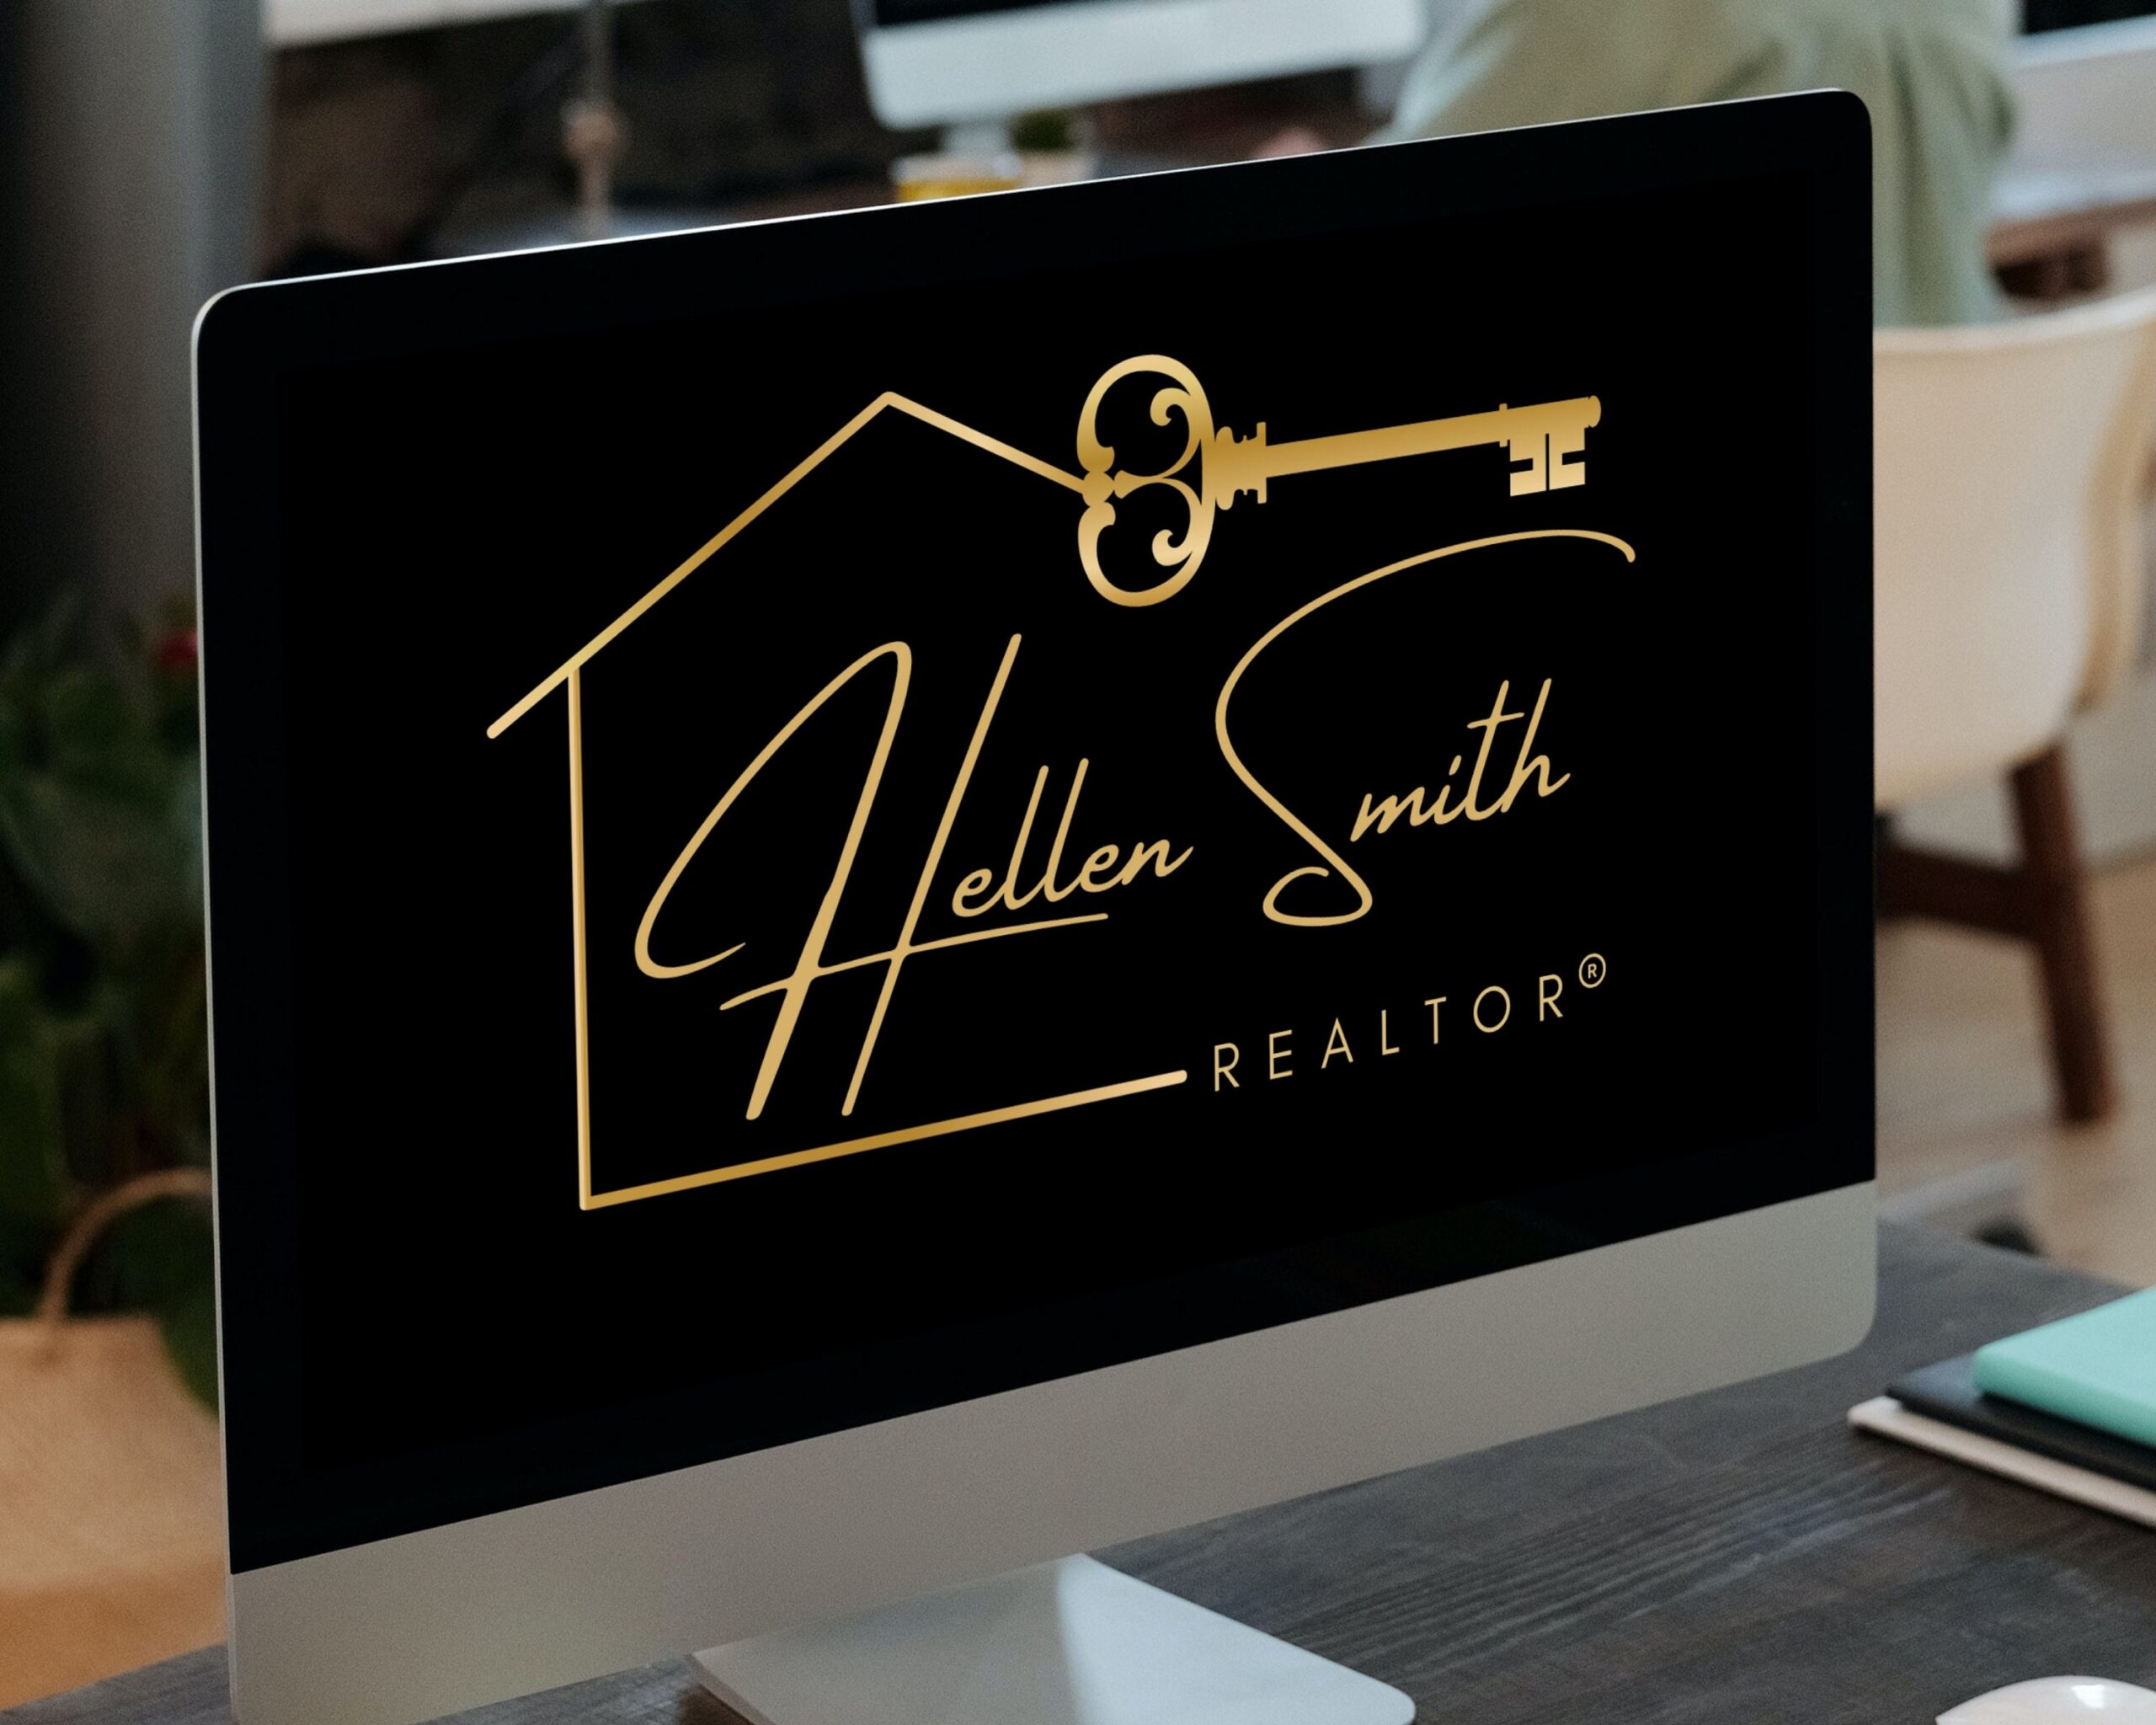 Premade REALTOR? Logo Design for Real Estate Agents -  Golden Classic Key Logo -  Submark and Watermark. I'll add Your Business Name and Tagline